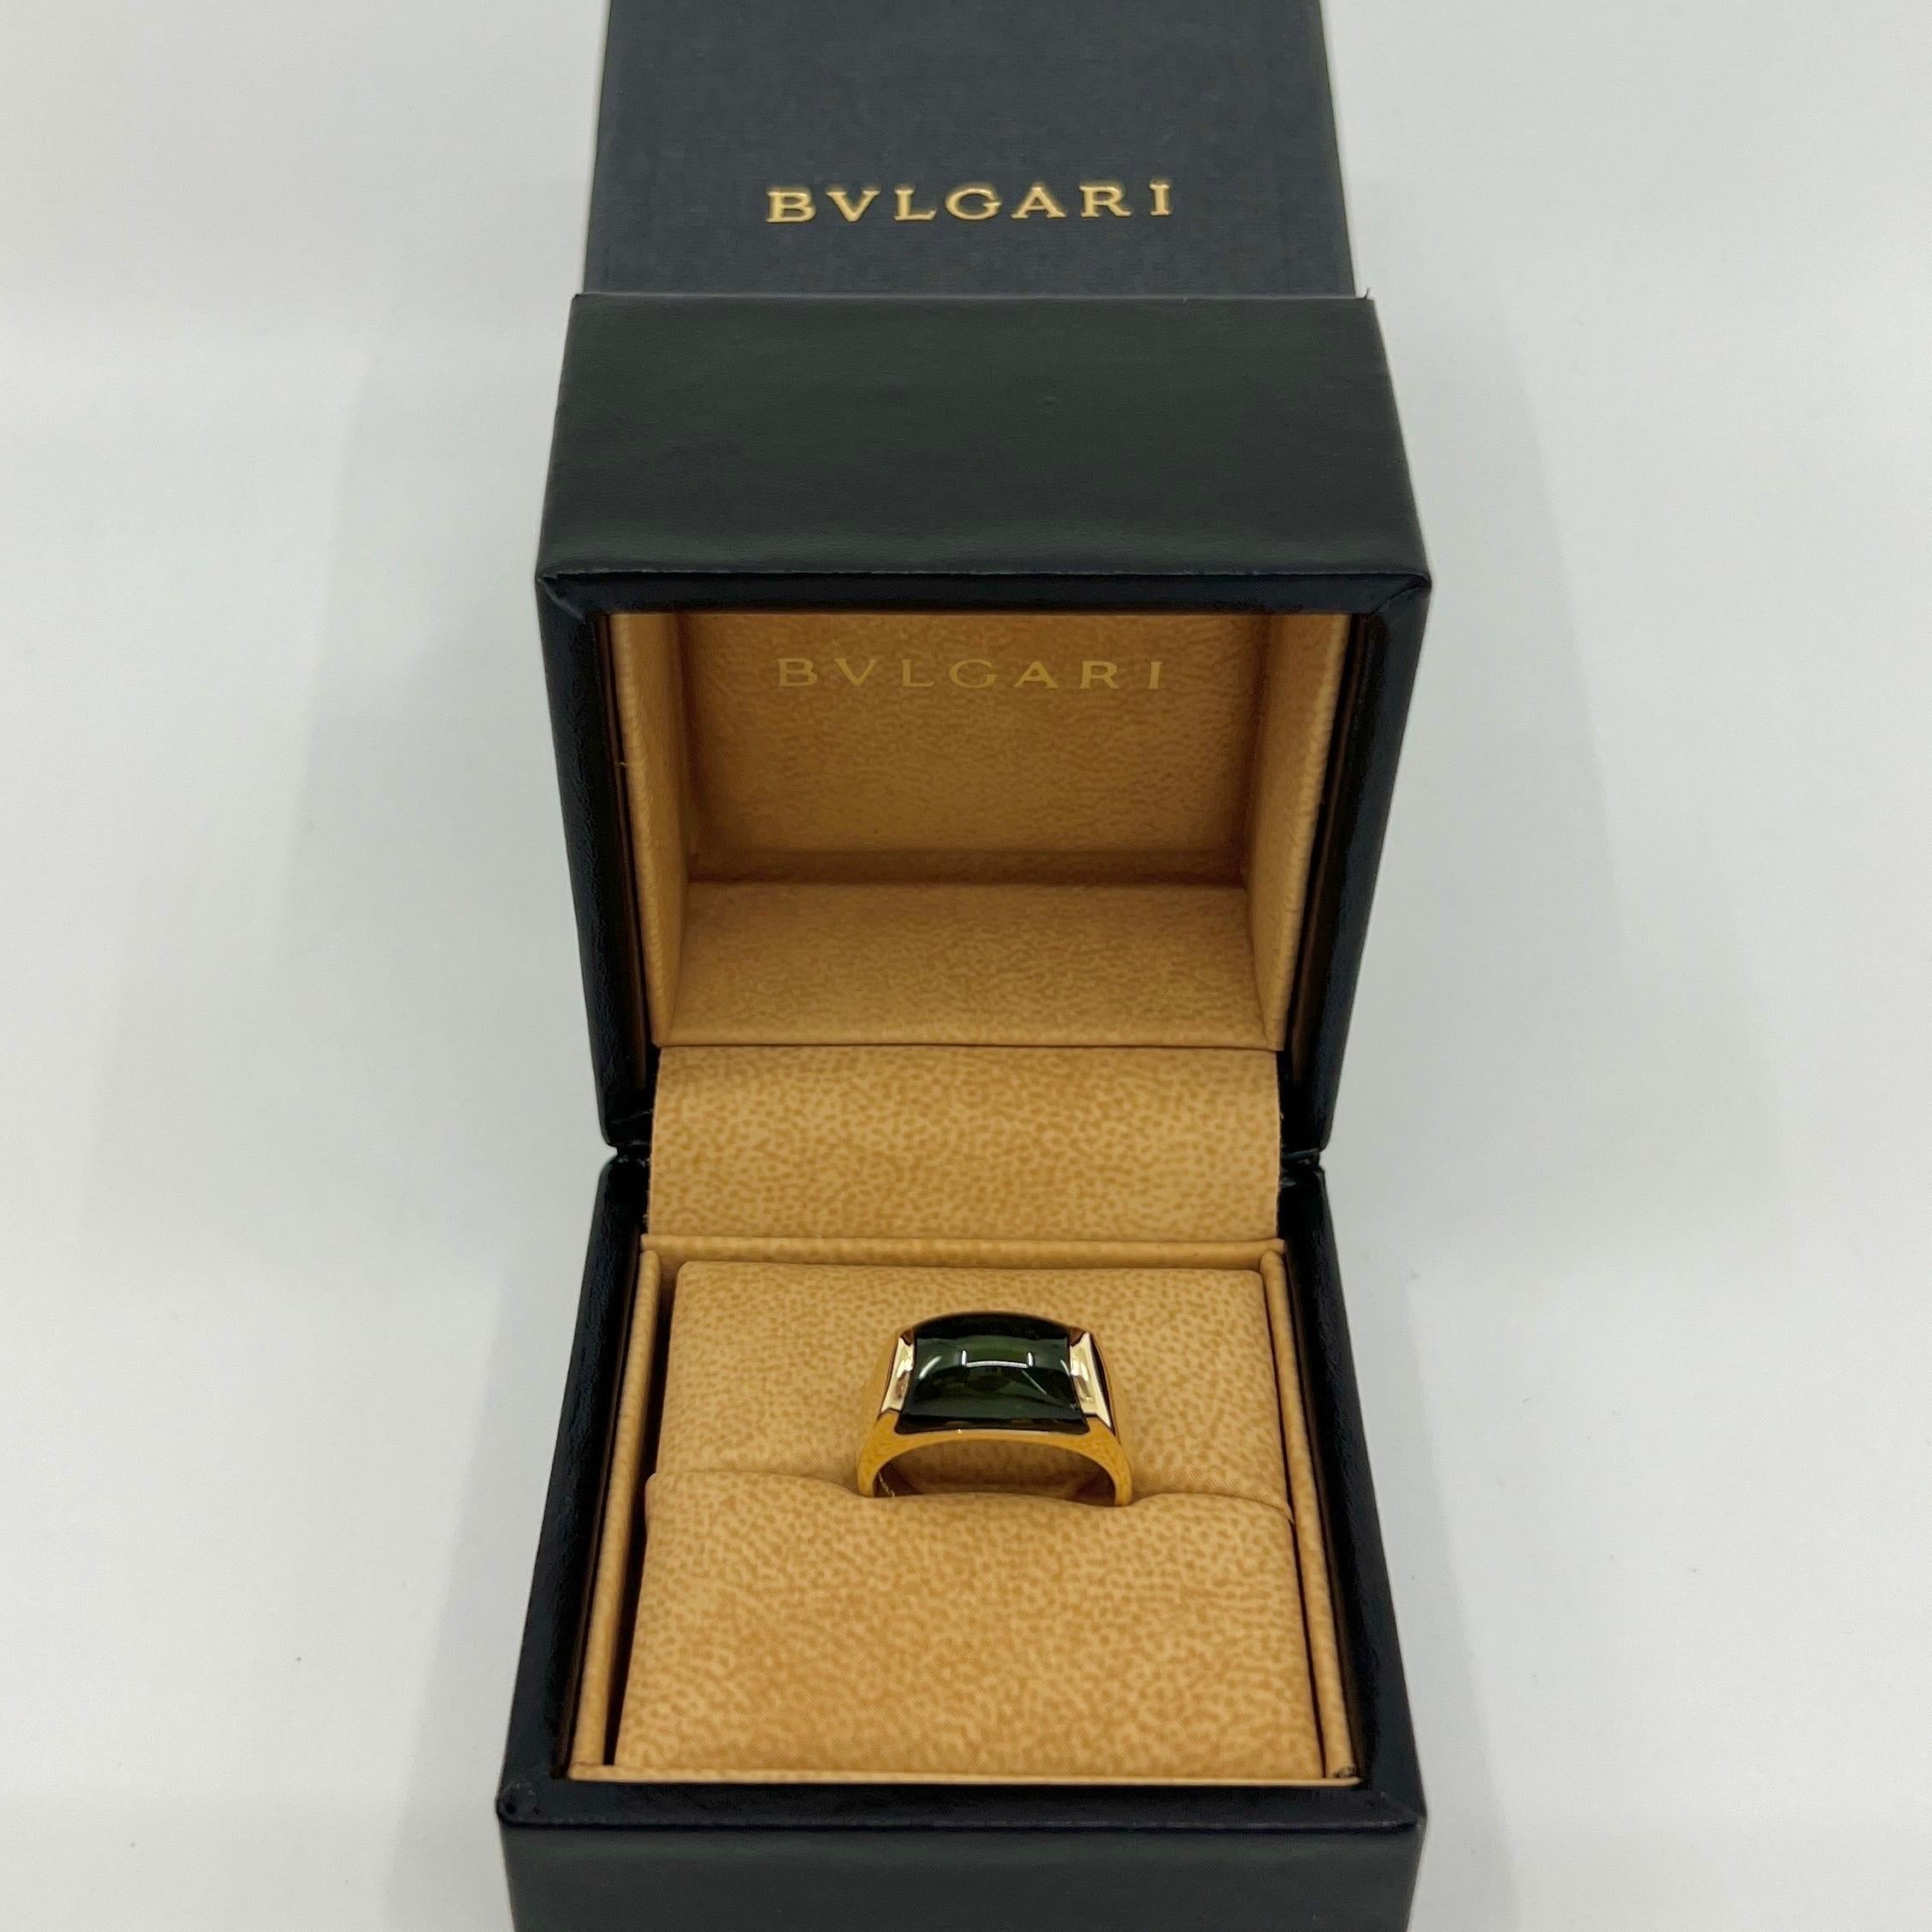 Rare Bvlgari Deep Green Tourmaline Tronchetto 18k Yellow Gold Ring.

Beautiful domed green tourmaline set in a fine 18k yellow gold tension set ring.

In very condition, has been professionally polished and cleaned. Some small natural inclusions in